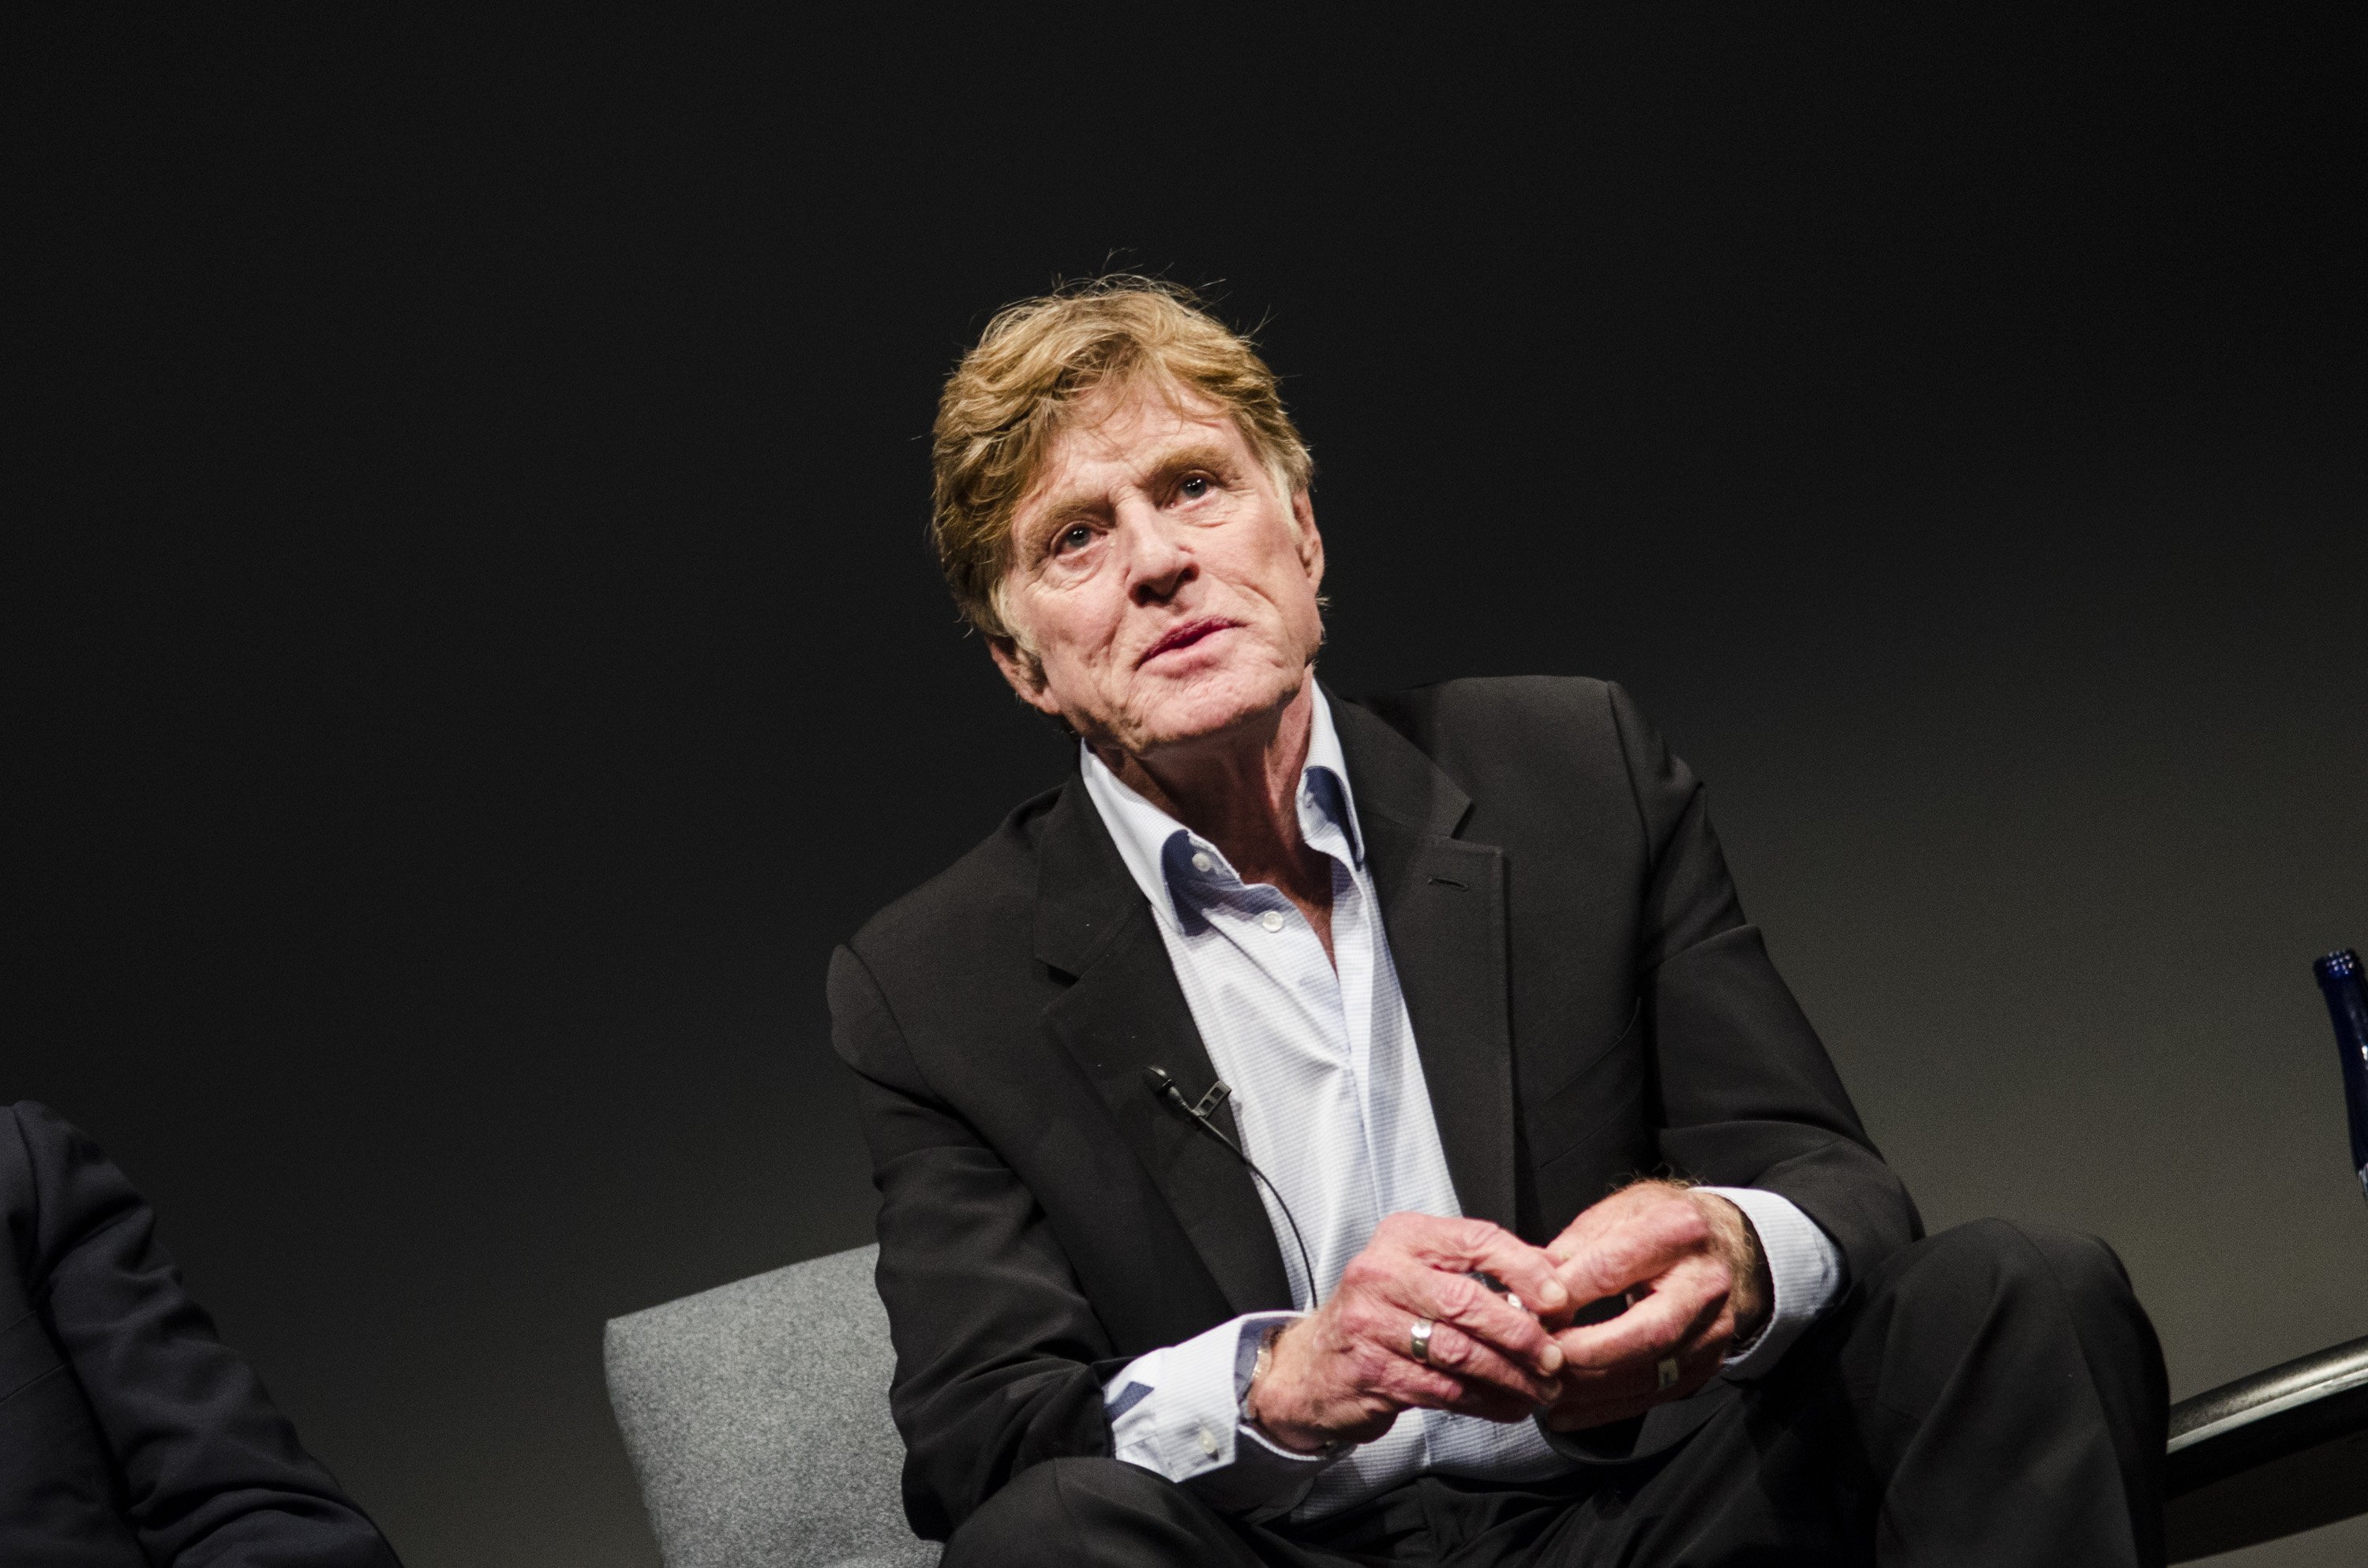 Robert Redford au Newseum le 18 avril 2013 | Photo : Getty Images